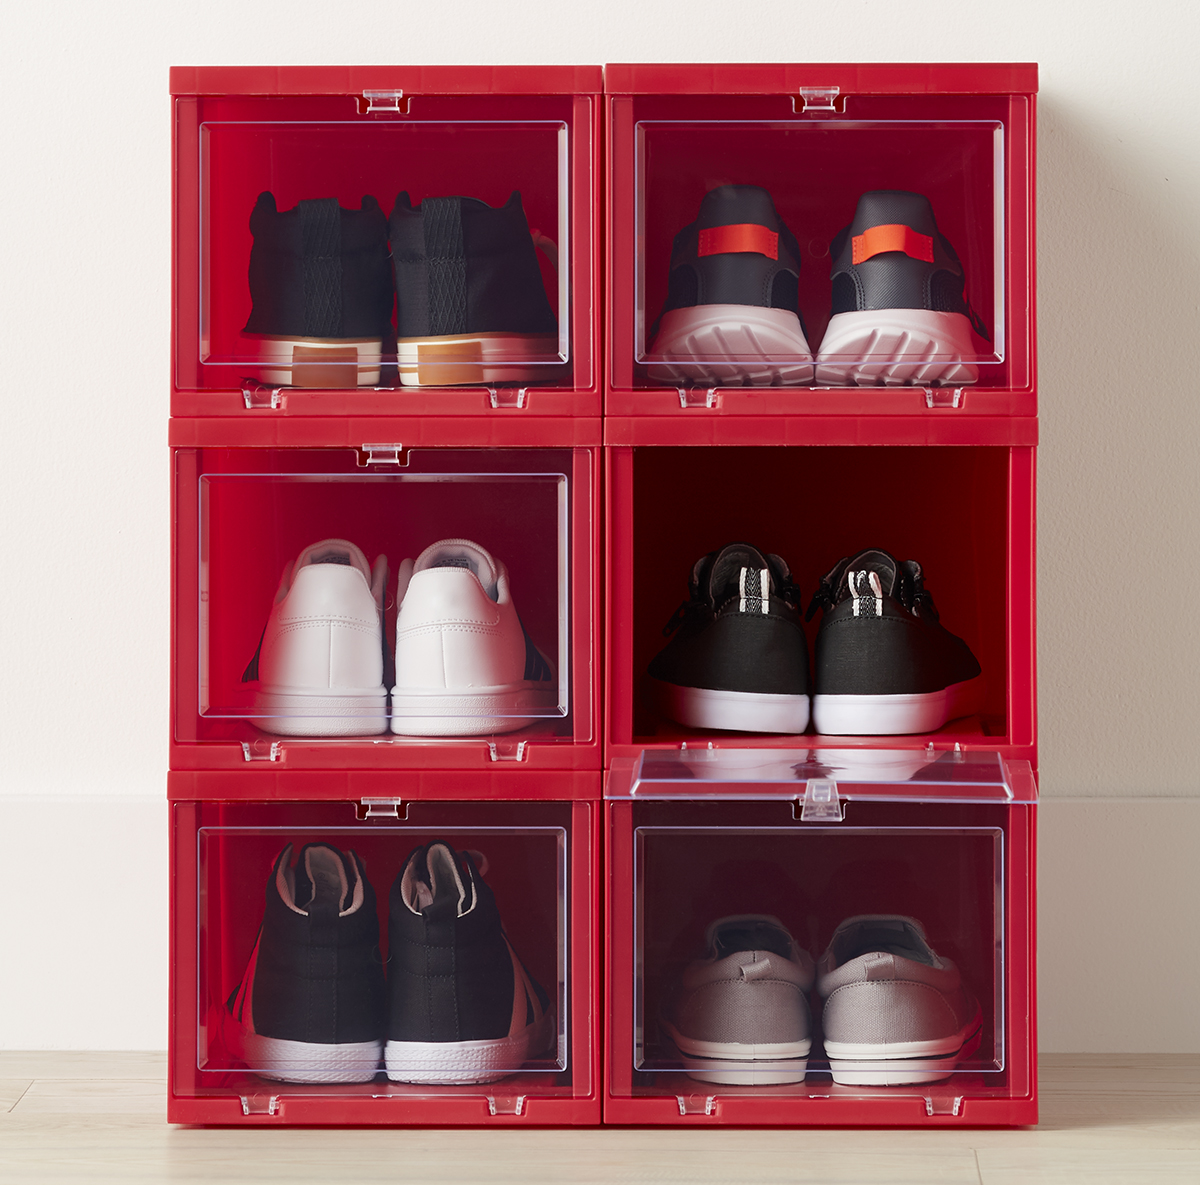 https://www.containerstore.com/catalogimages/463290/10081083-drop-front-shoe-box-small-r.jpg